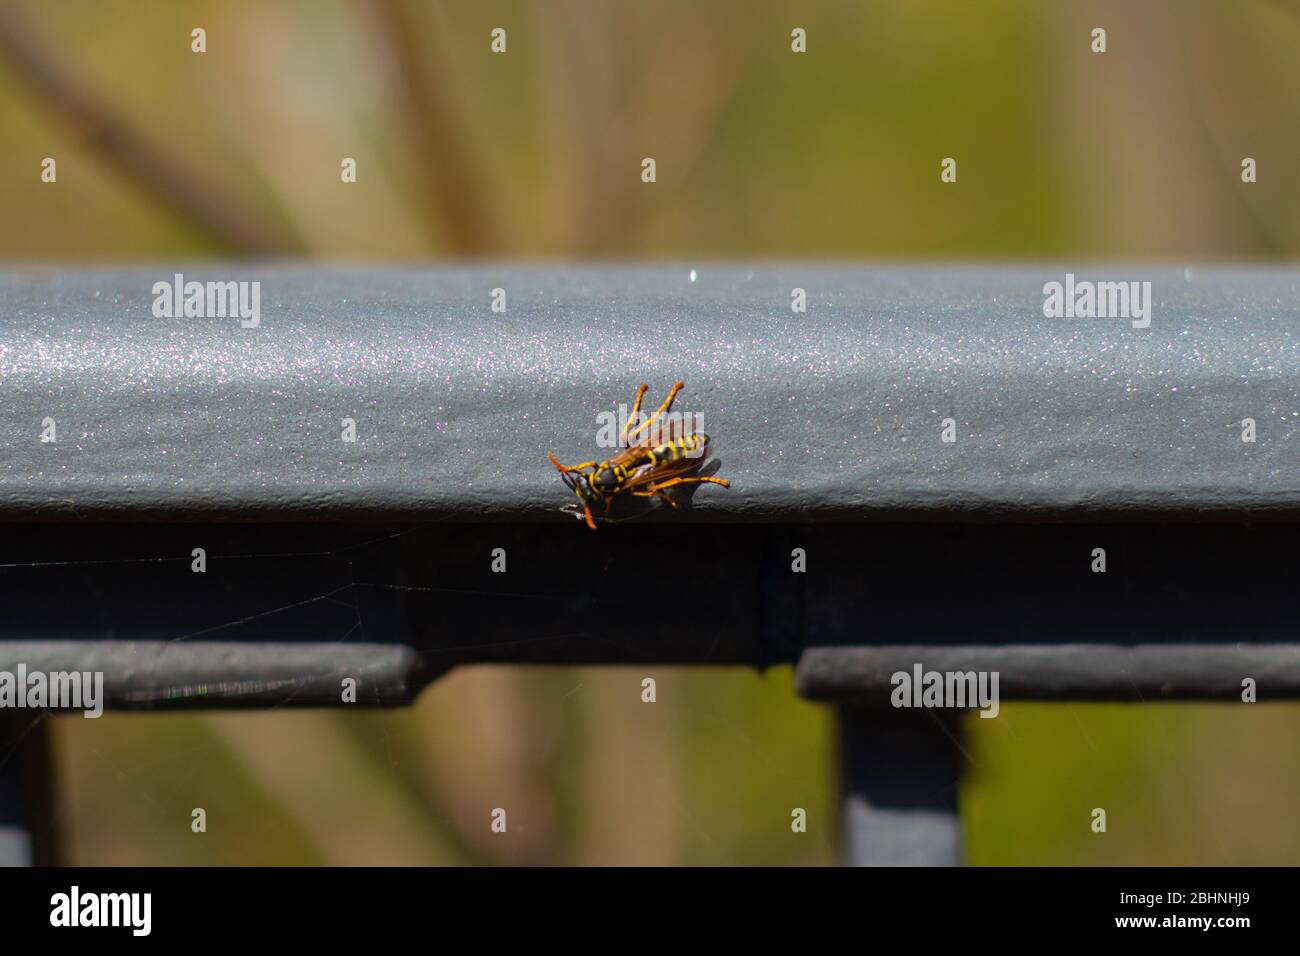 Close up of a wasp sitting on a metal railing sparkling in the sunlight Stock Photo